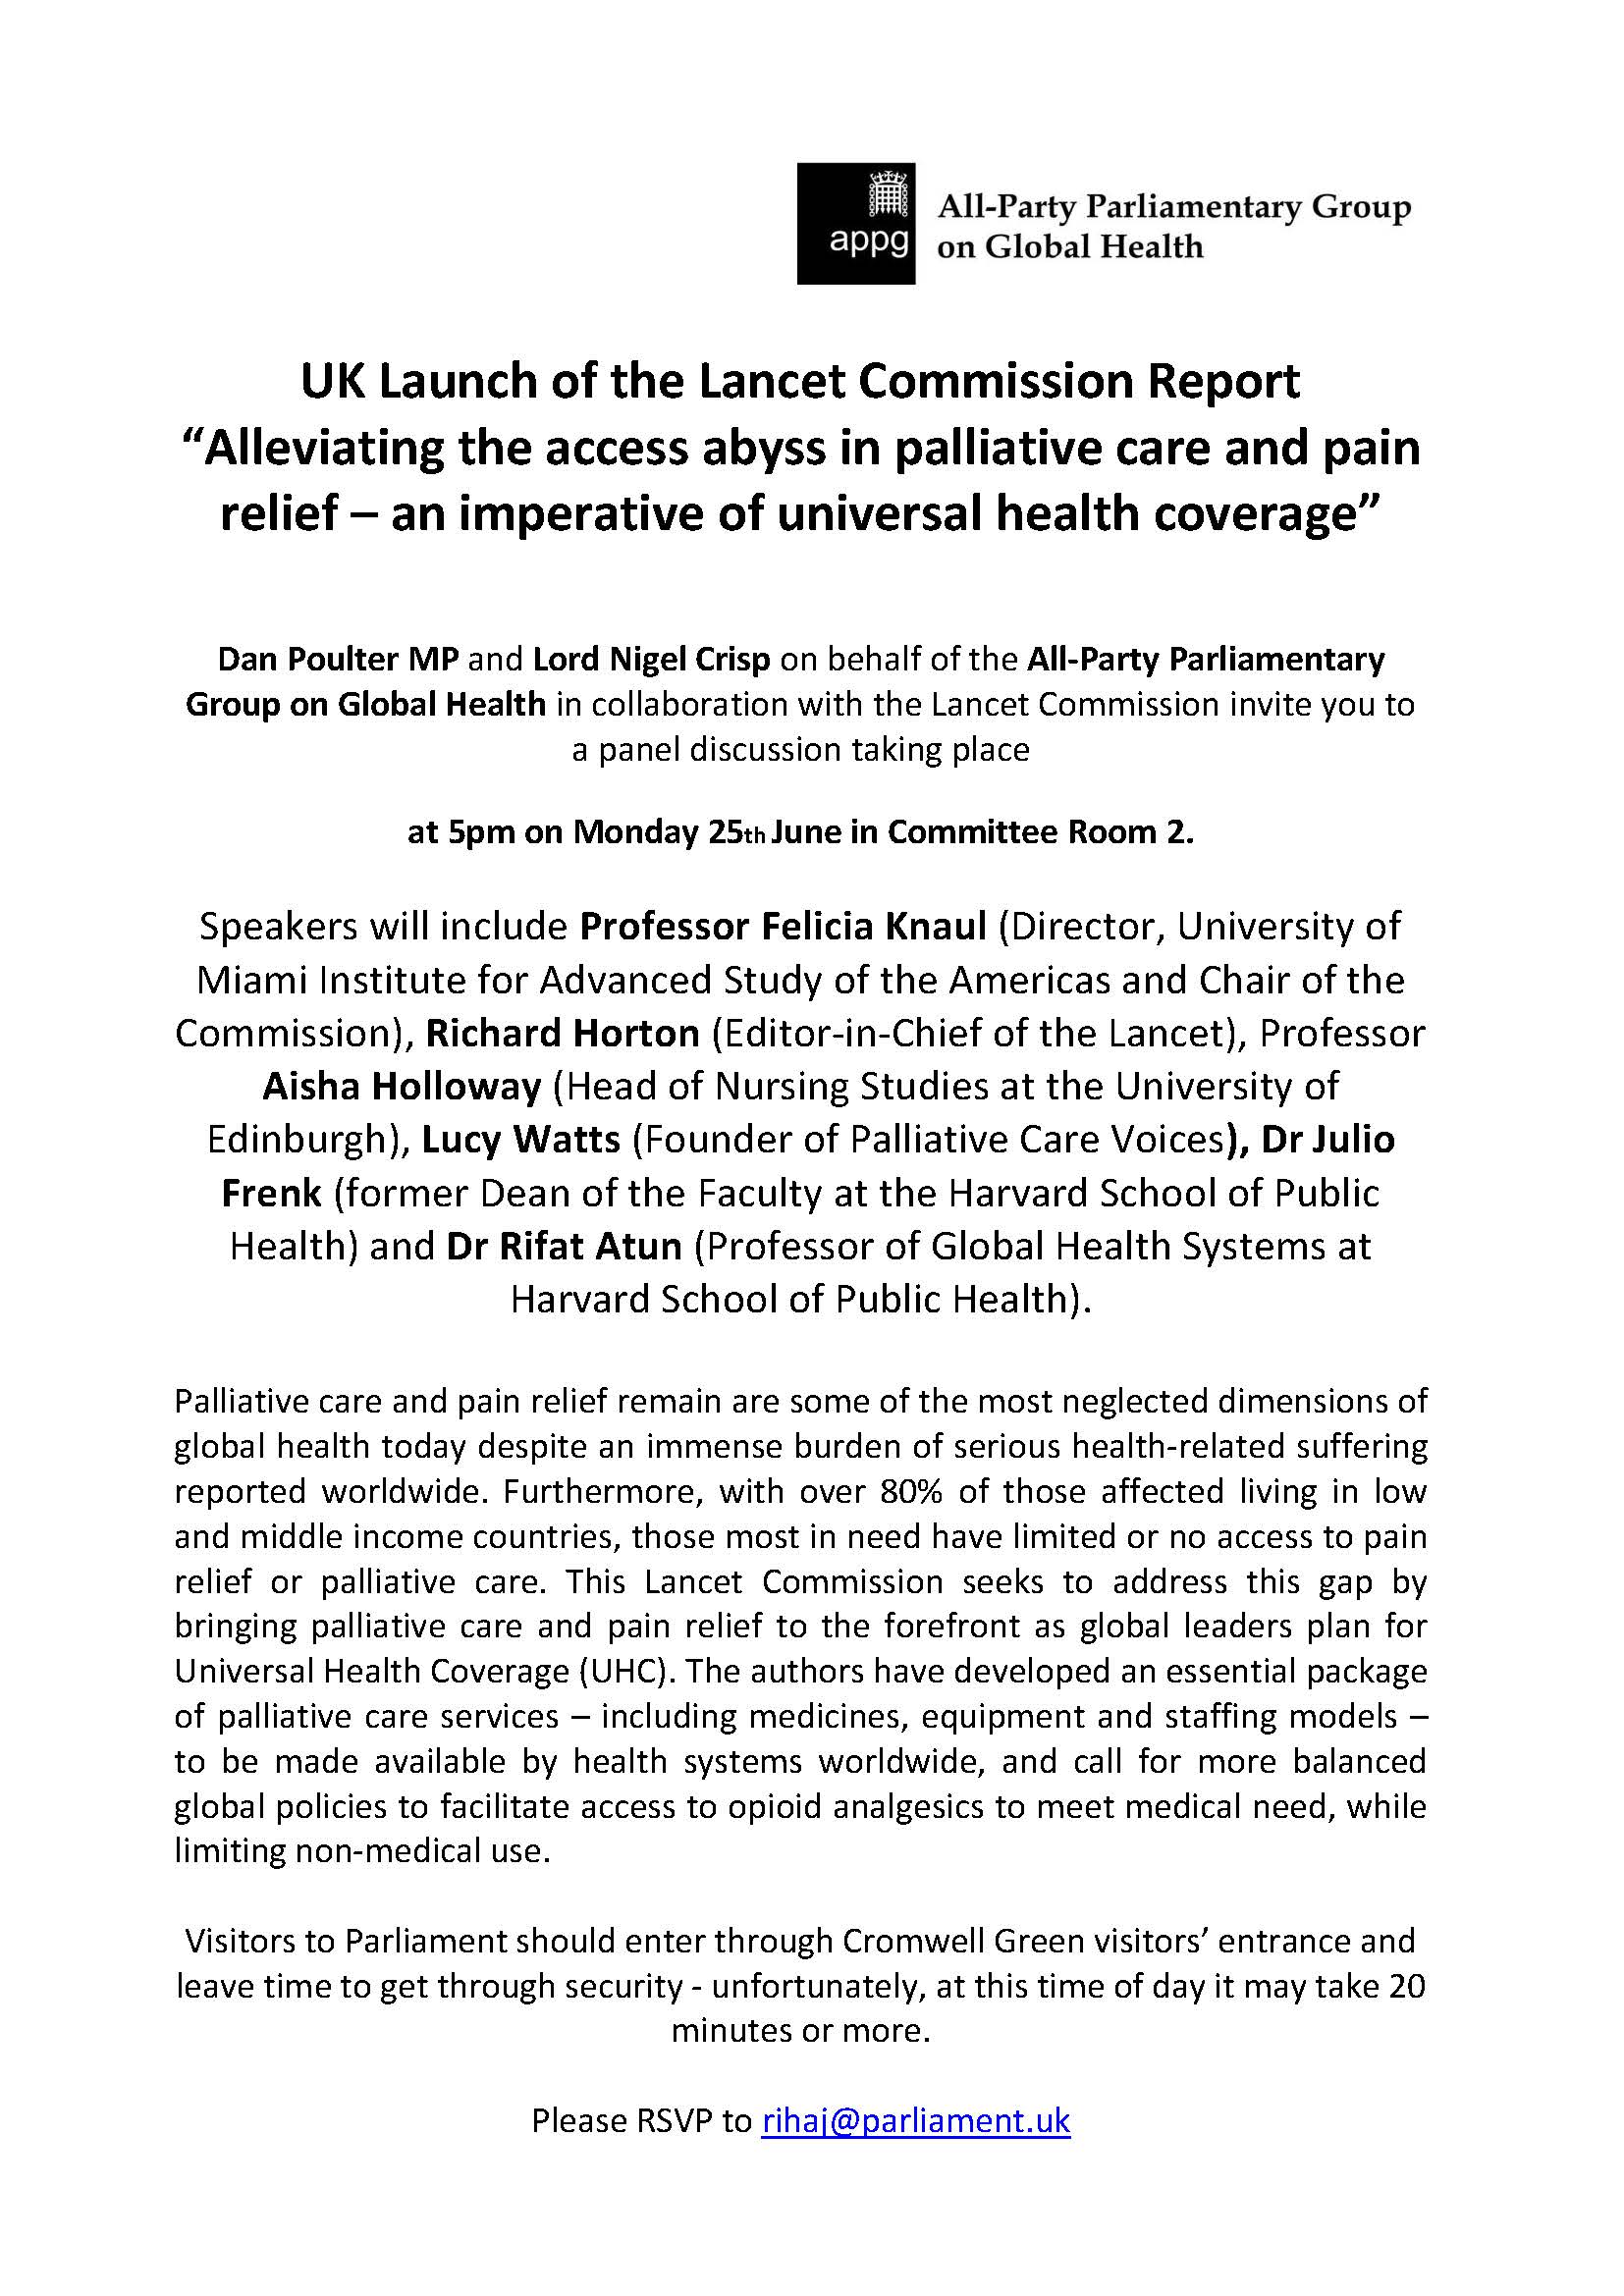 Invitation: UK Launch of the Lancet Commission Report “Alleviating the access abyss in palliative care and pain relief – an imperative of universal health coverage”